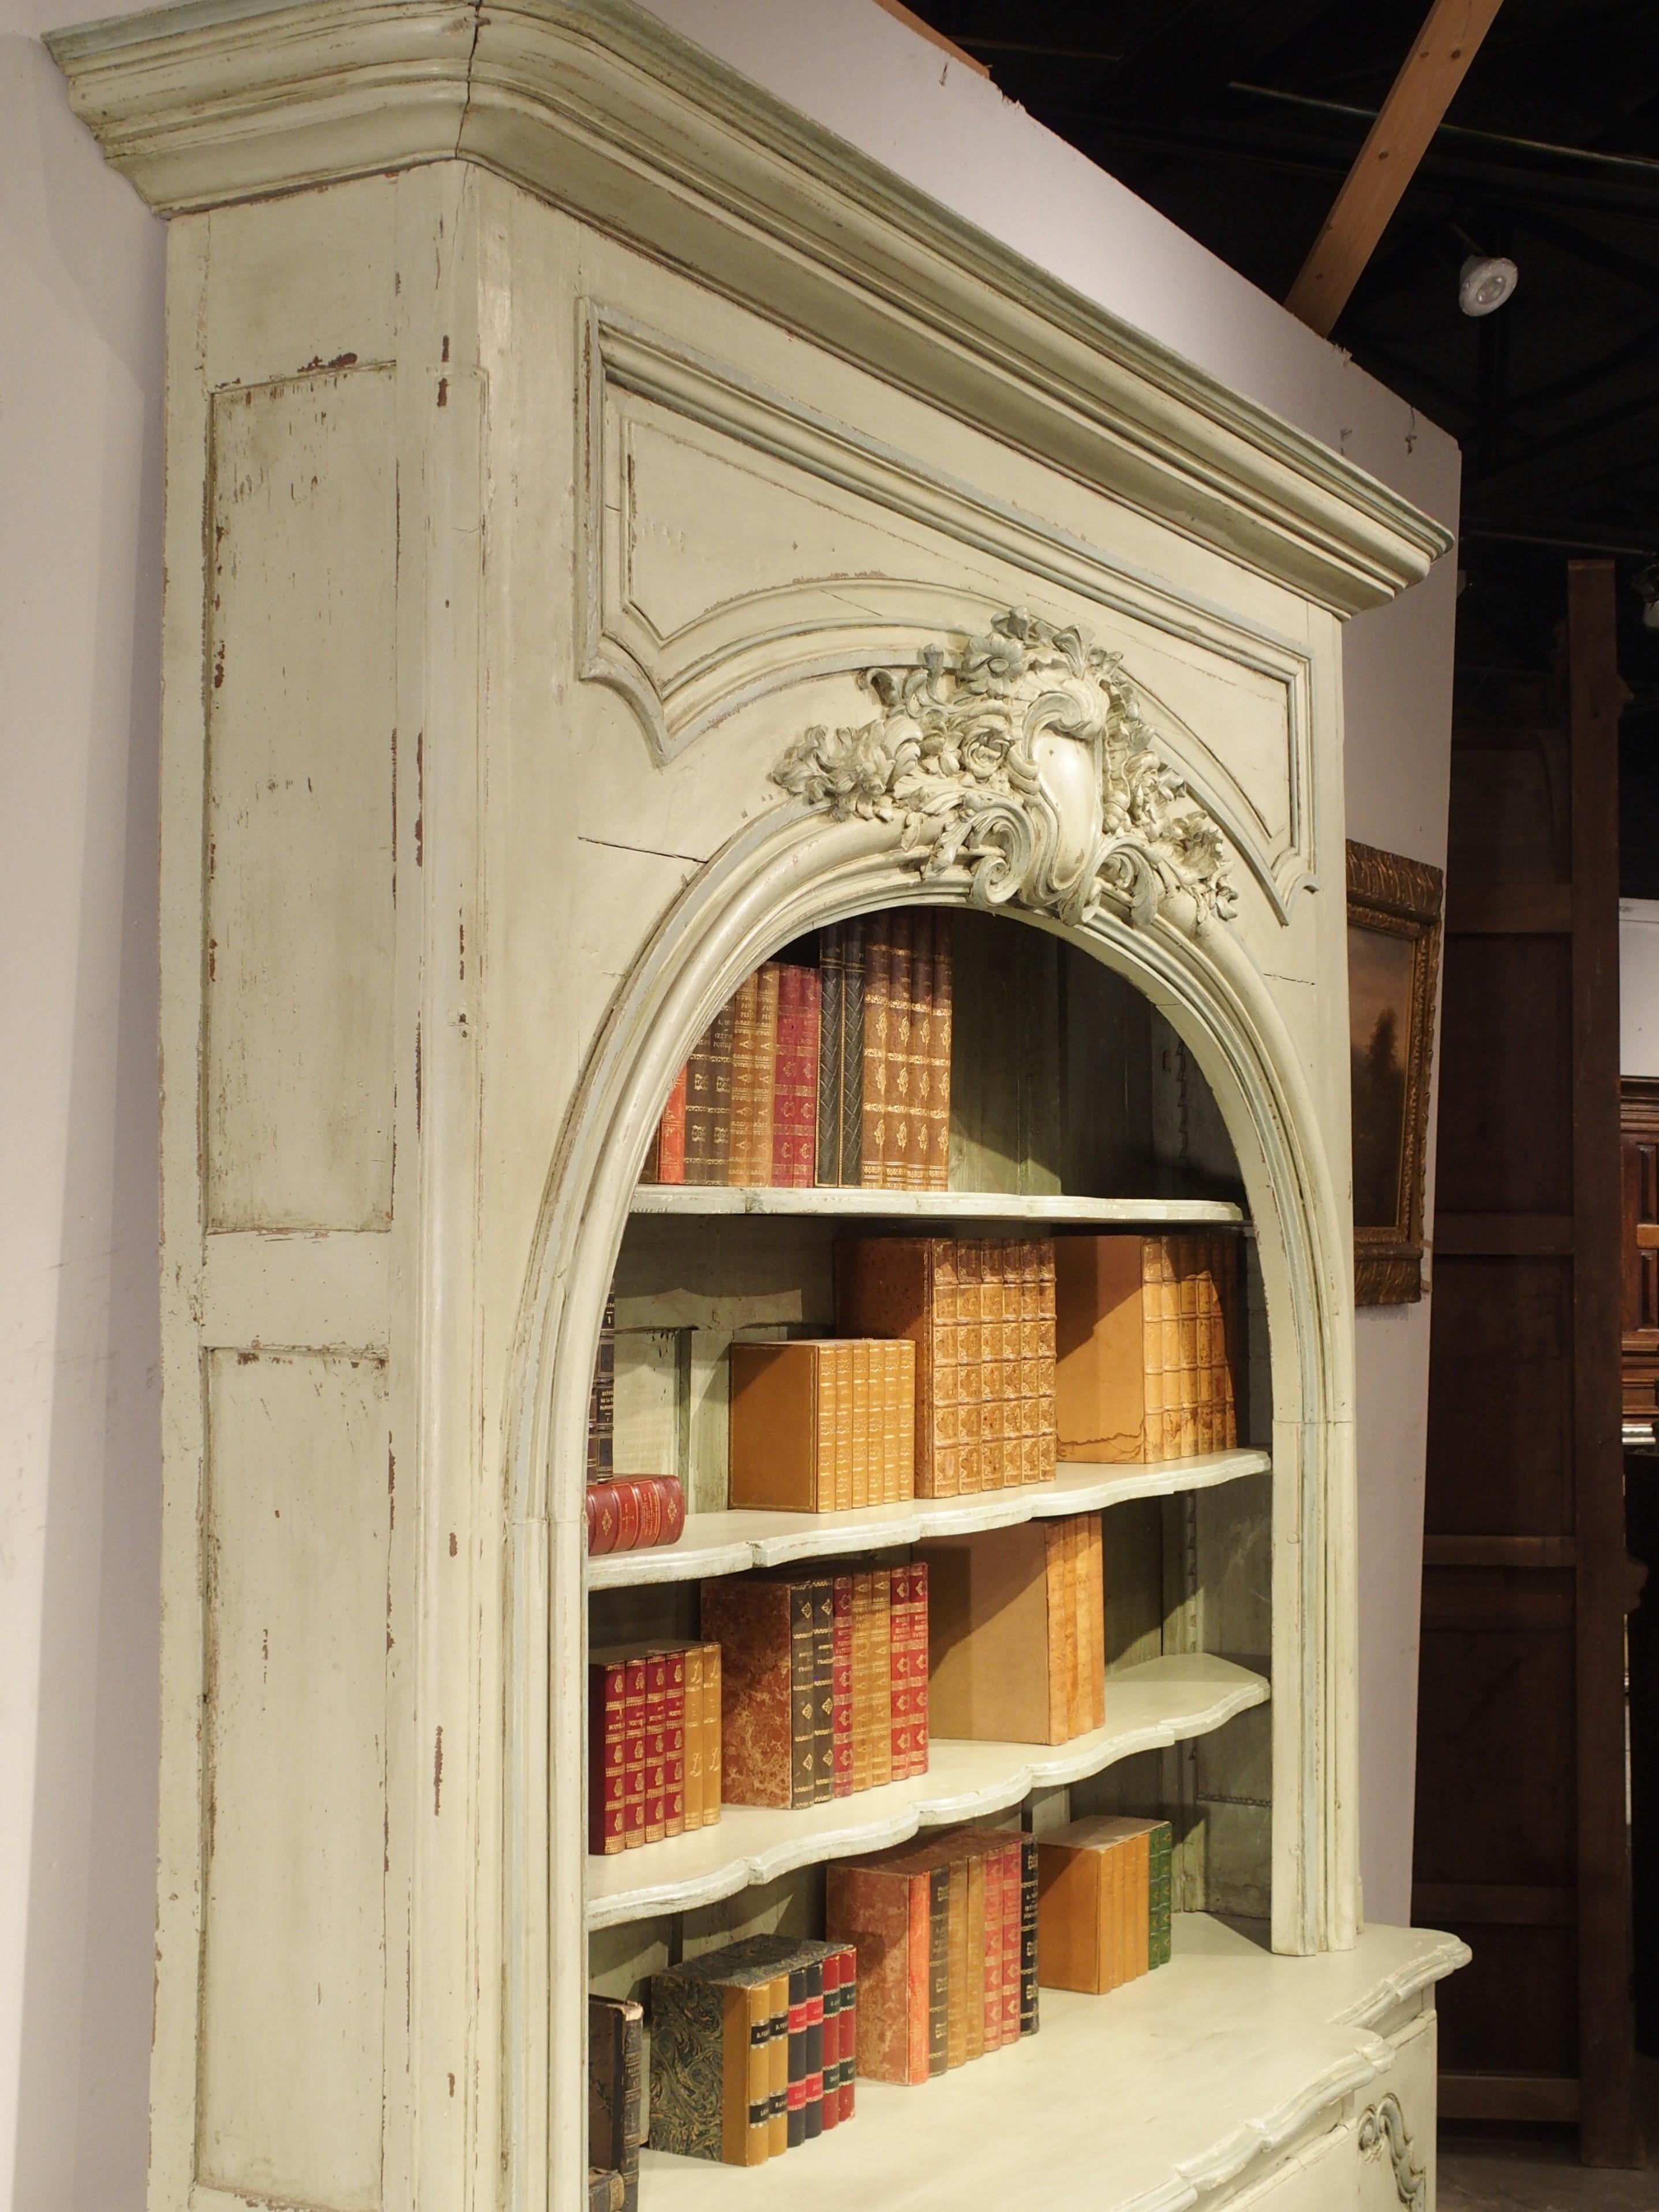 This stunning painted bibliotheque most recently came from a chateau in the Lauragais region, in the southwest of France. The bookcase is realized from antique polychrome gray-green elements and features a beautiful arched opening which is crowned